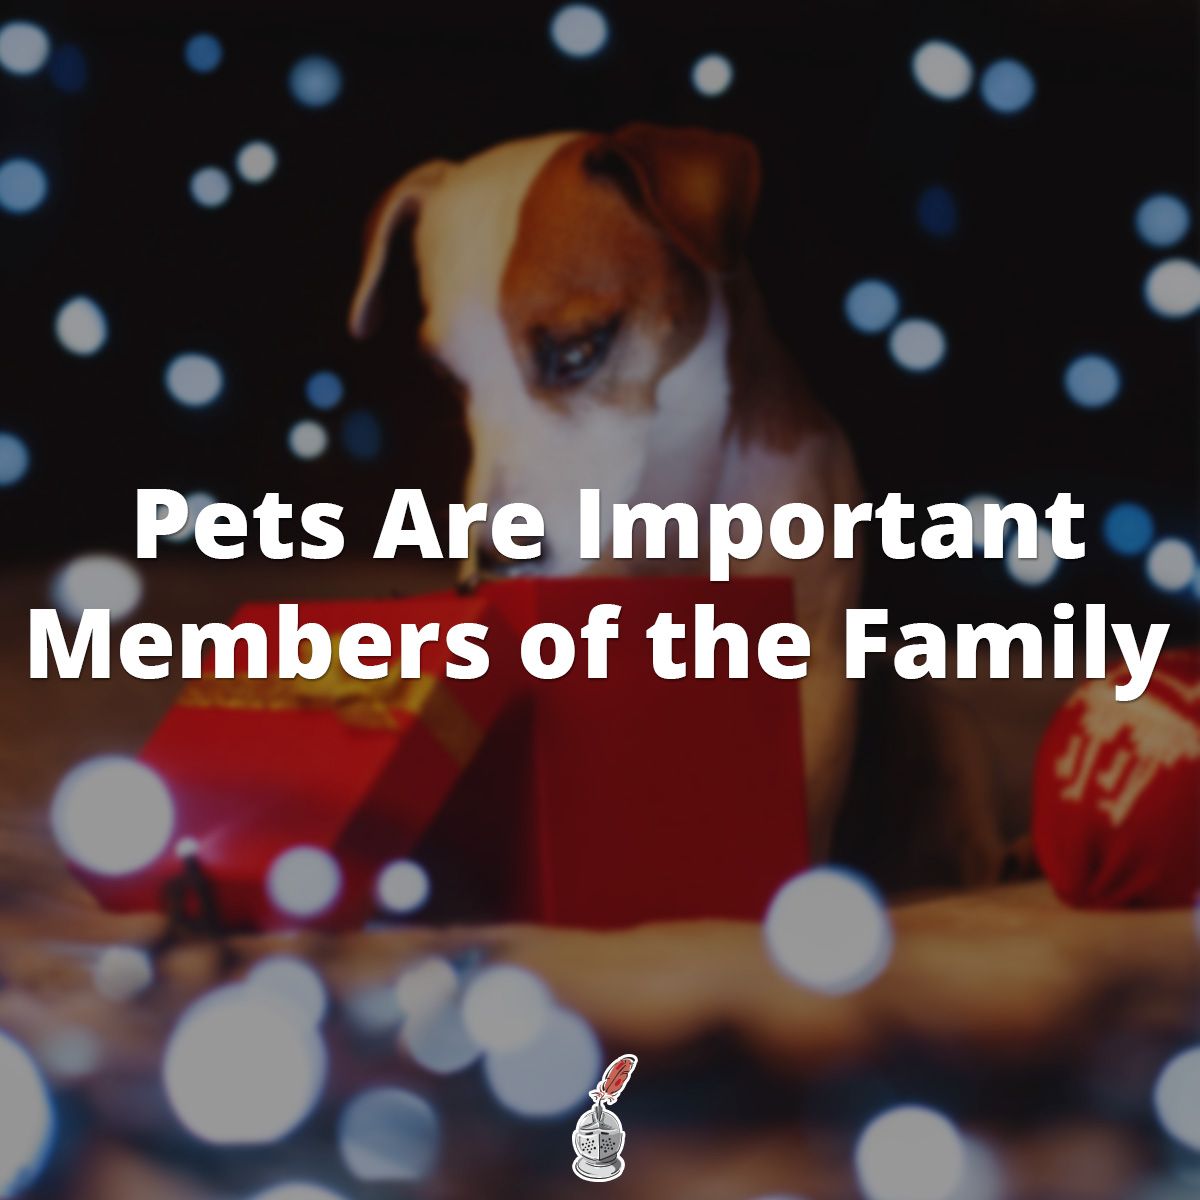 Pets Are Important Members of the Family